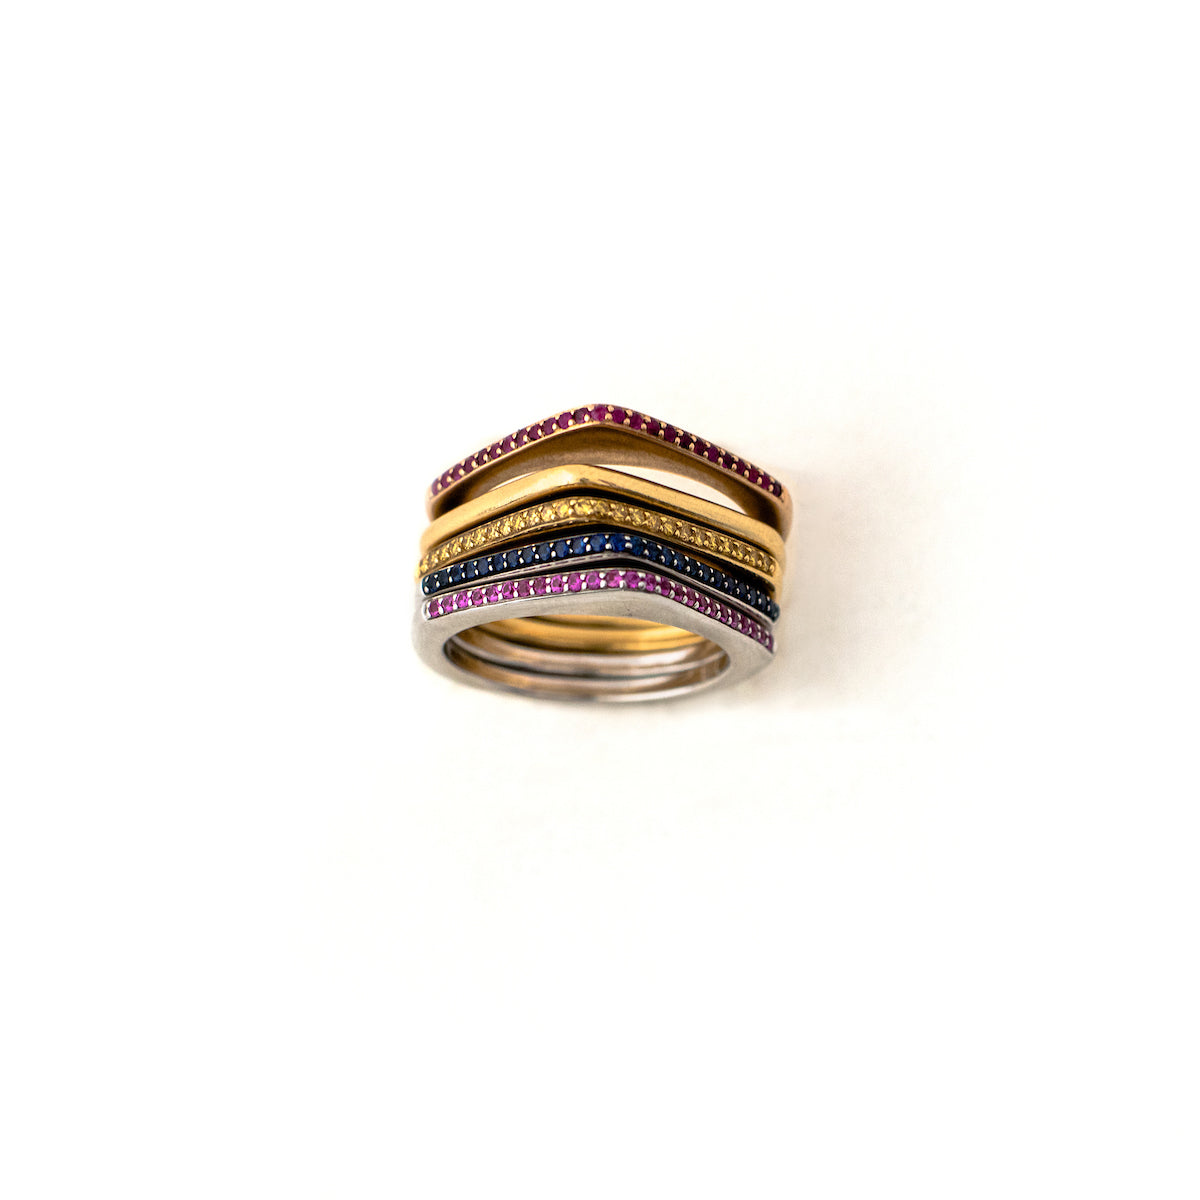 These incredibly unique rings from the 1970s are made of 18K gold and feature a sleek silhouette with a point on the top. They are available either solid gold or encrusted in sapphires. These can be worn on their own, as a set or add one to your existing stack for even more drama. These are a true statement piece! Front ring stack view